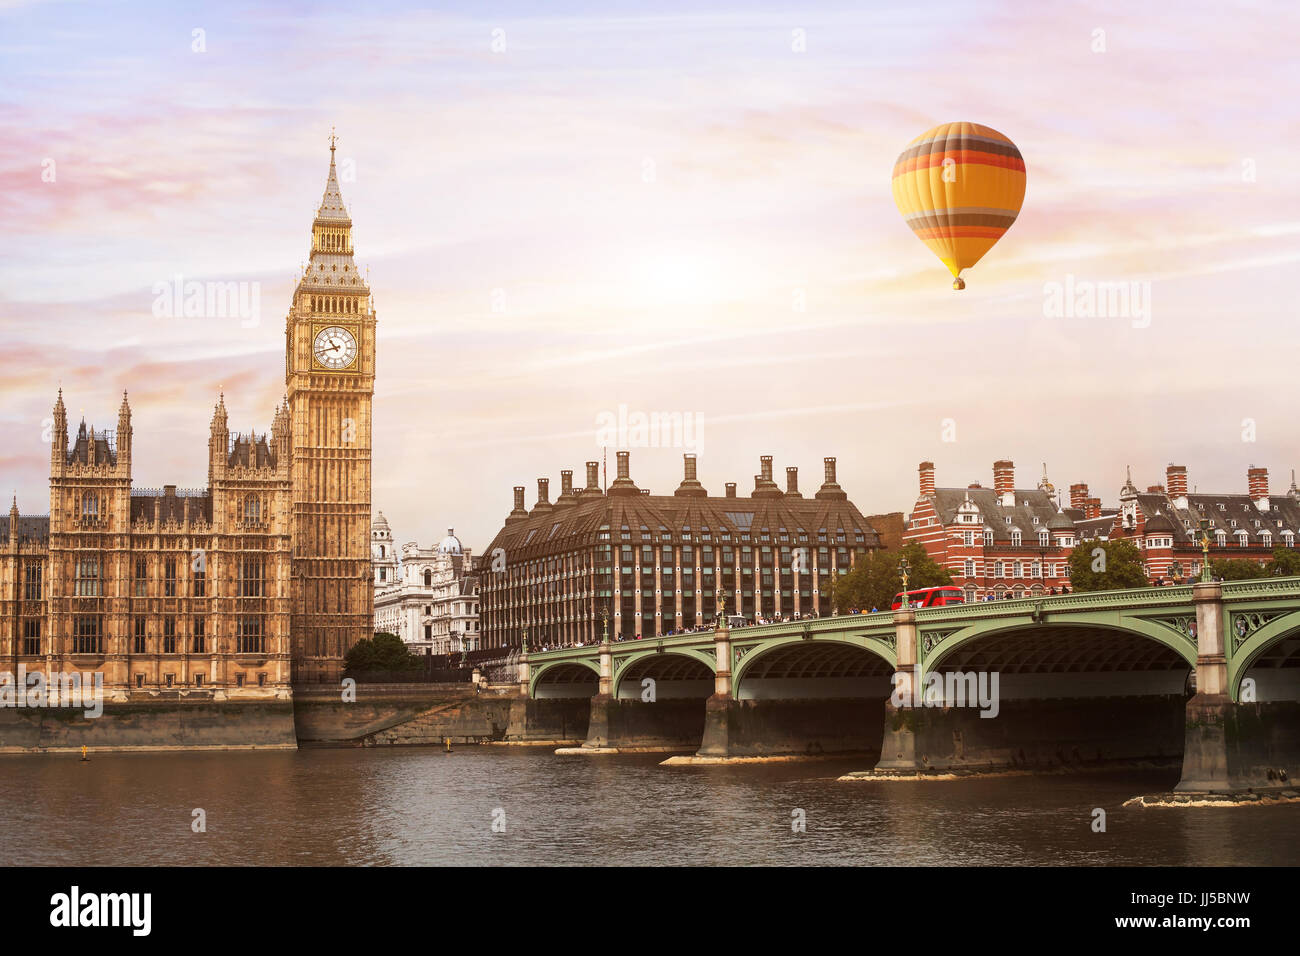 hot air balloon in London, beautiful view of Big Ben tower, river  and bridge Stock Photo